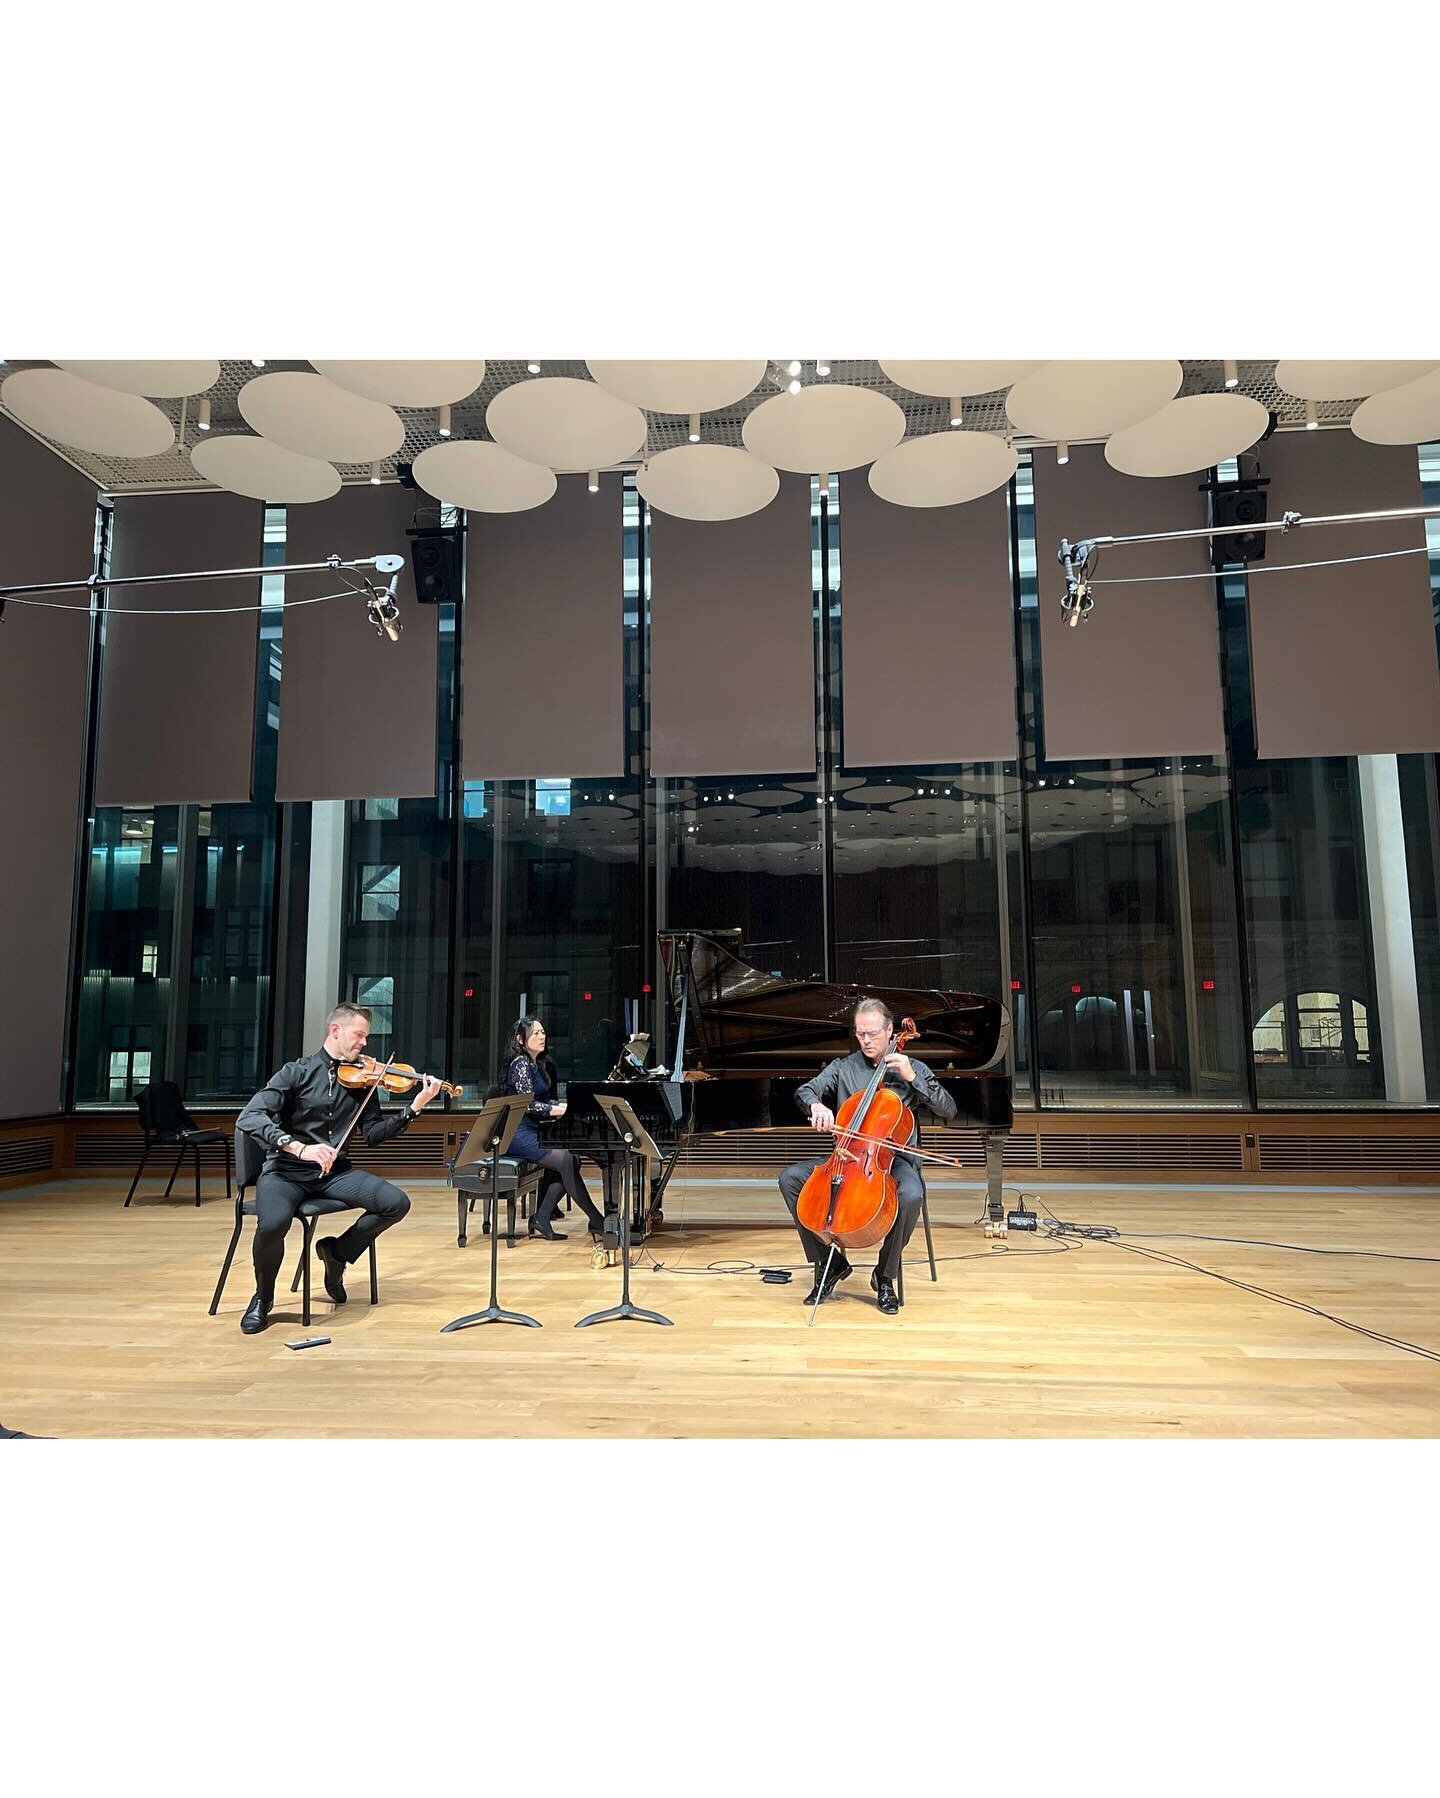 Just had an unforgettable Artist Faculty Recital at NYU&rsquo;s Paulson Center, sharing the stage with the absolutely brilliant #filippogady &amp; #gaisforddaniel! 🎹 🎻 Grateful for the opportunity to make music with such amazing musicians and a won